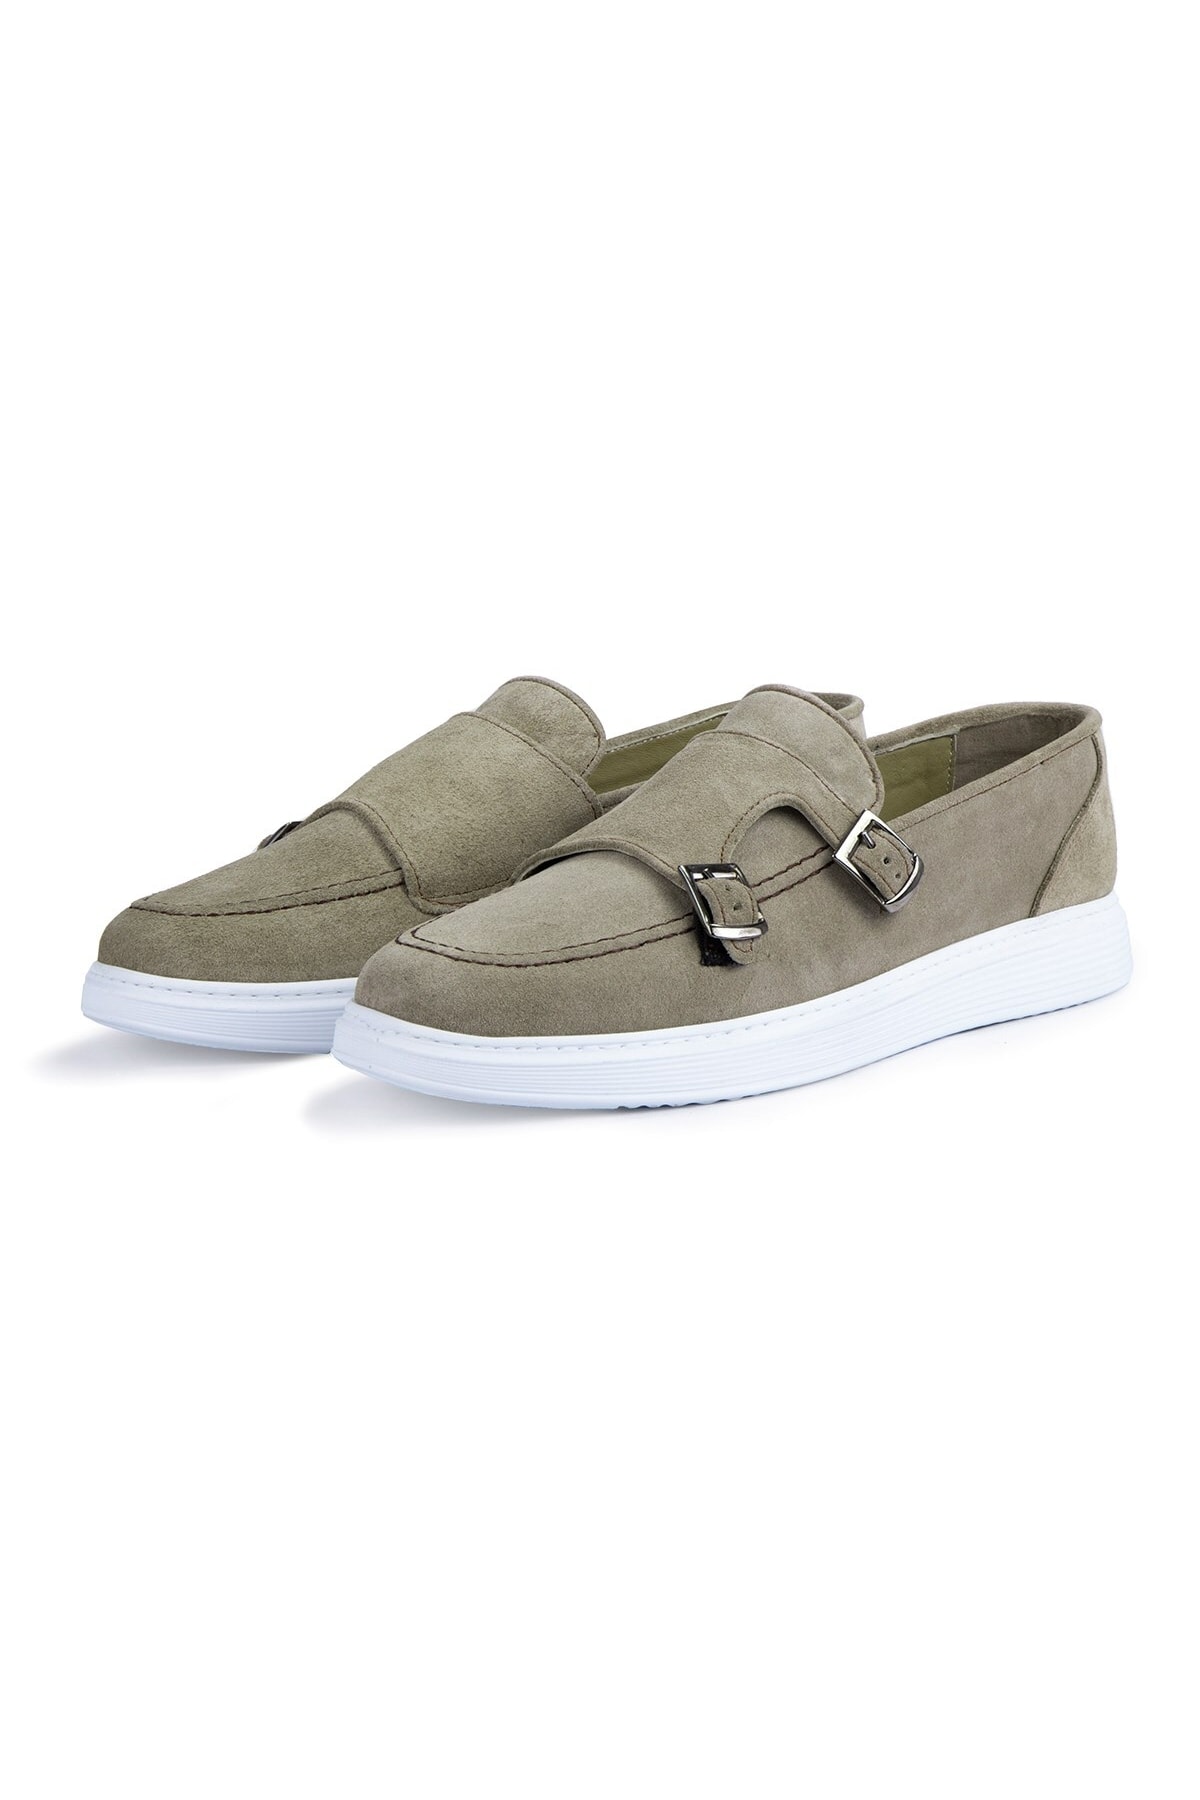 Levně Ducavelli Airy Men's Casual Shoes From Genuine Leather and Suede, Suede Loafers, Summer Shoes Sand Beige.